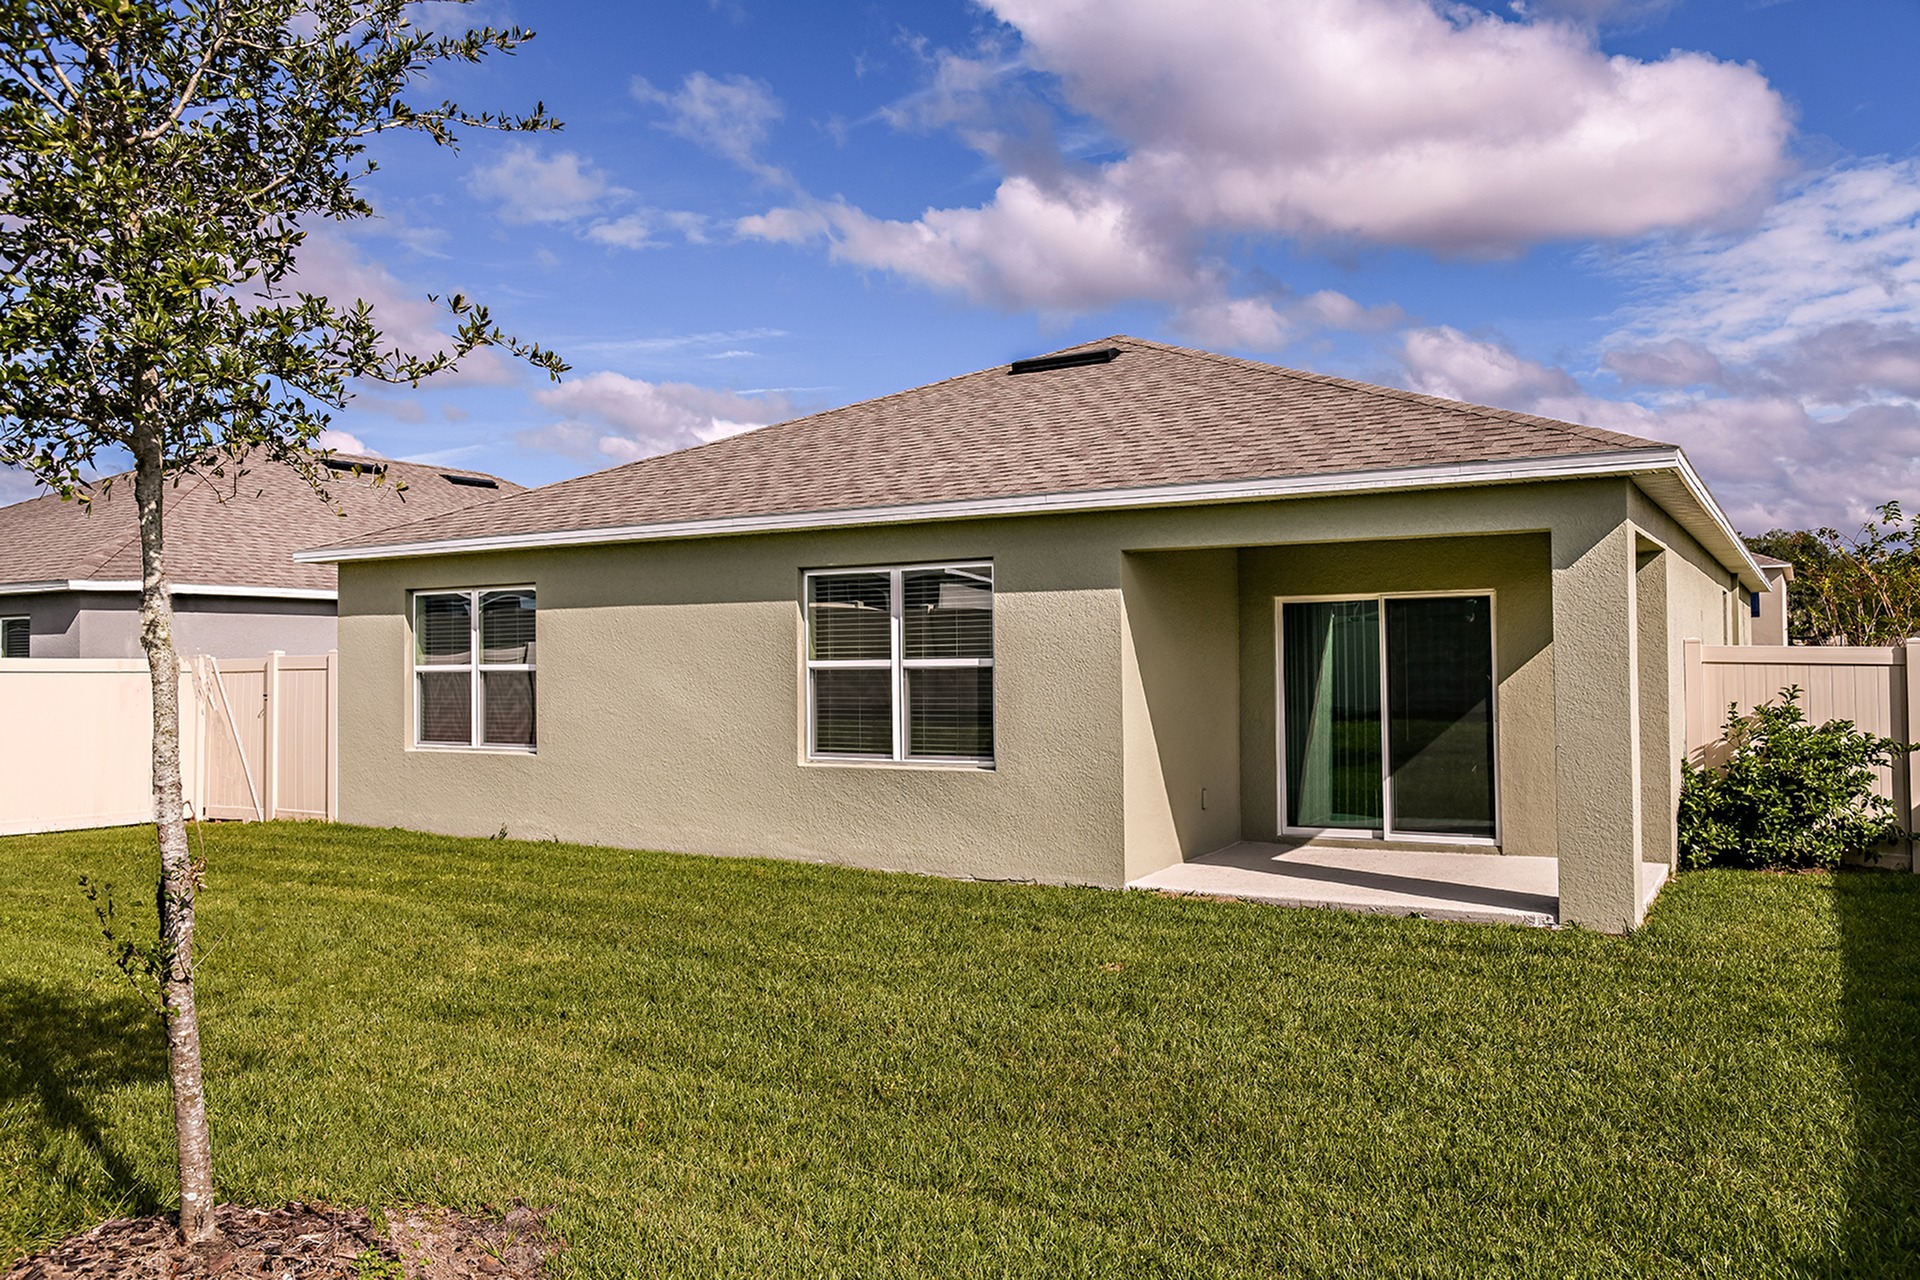 Exterior view of a home for rent with a patio. Beautifully landscaped, fenced in backyard, at a home for rent in Apopka, Florida.